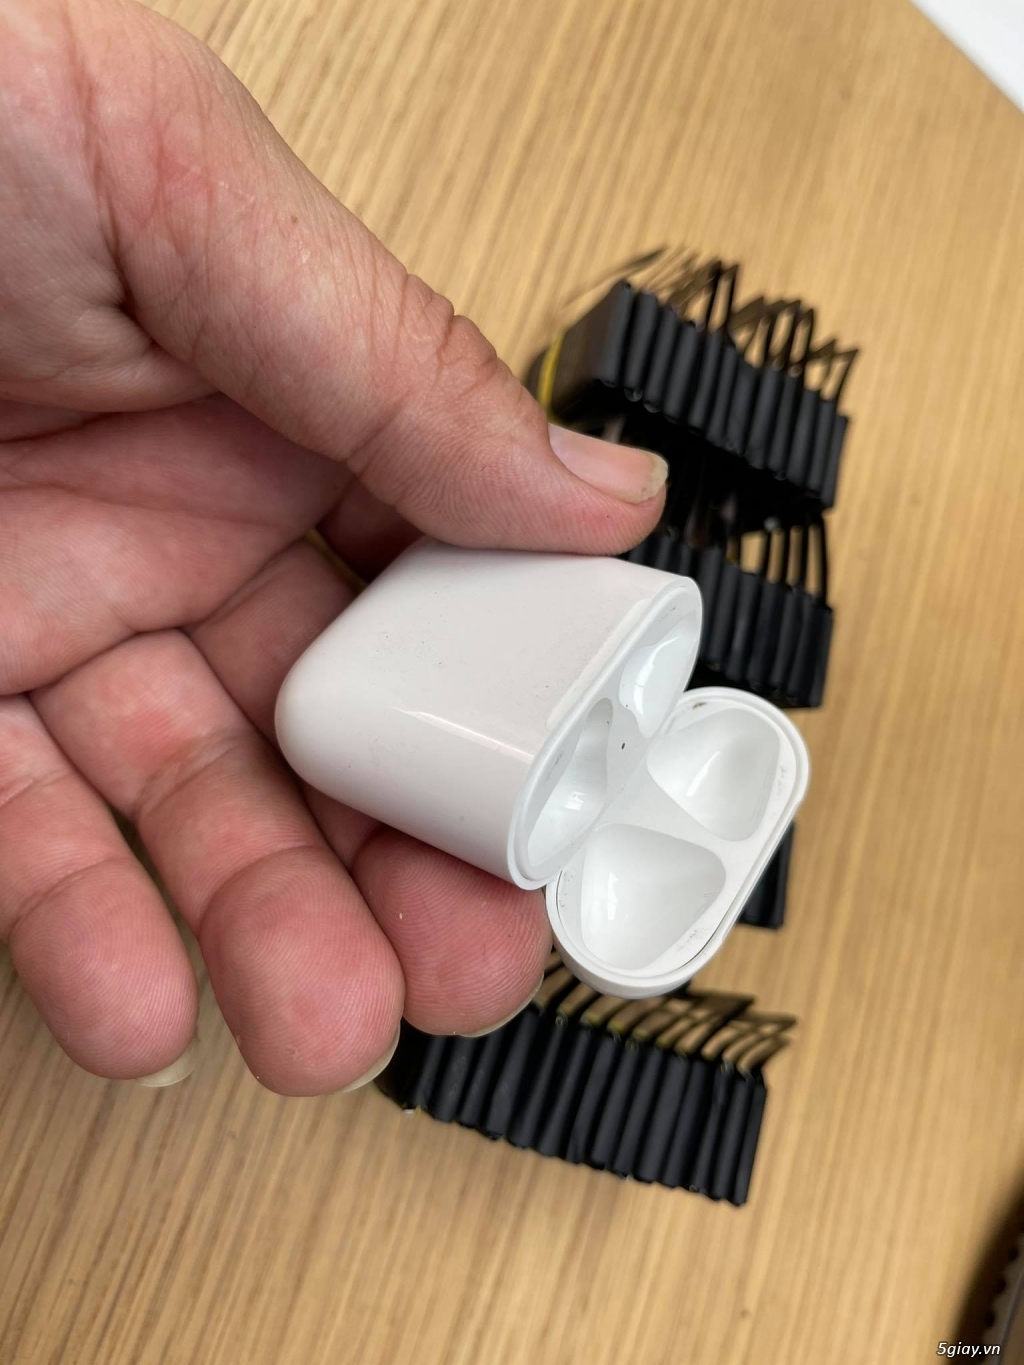 Thay pin dock sạc Airpods 1 - Airpods 2 - 2